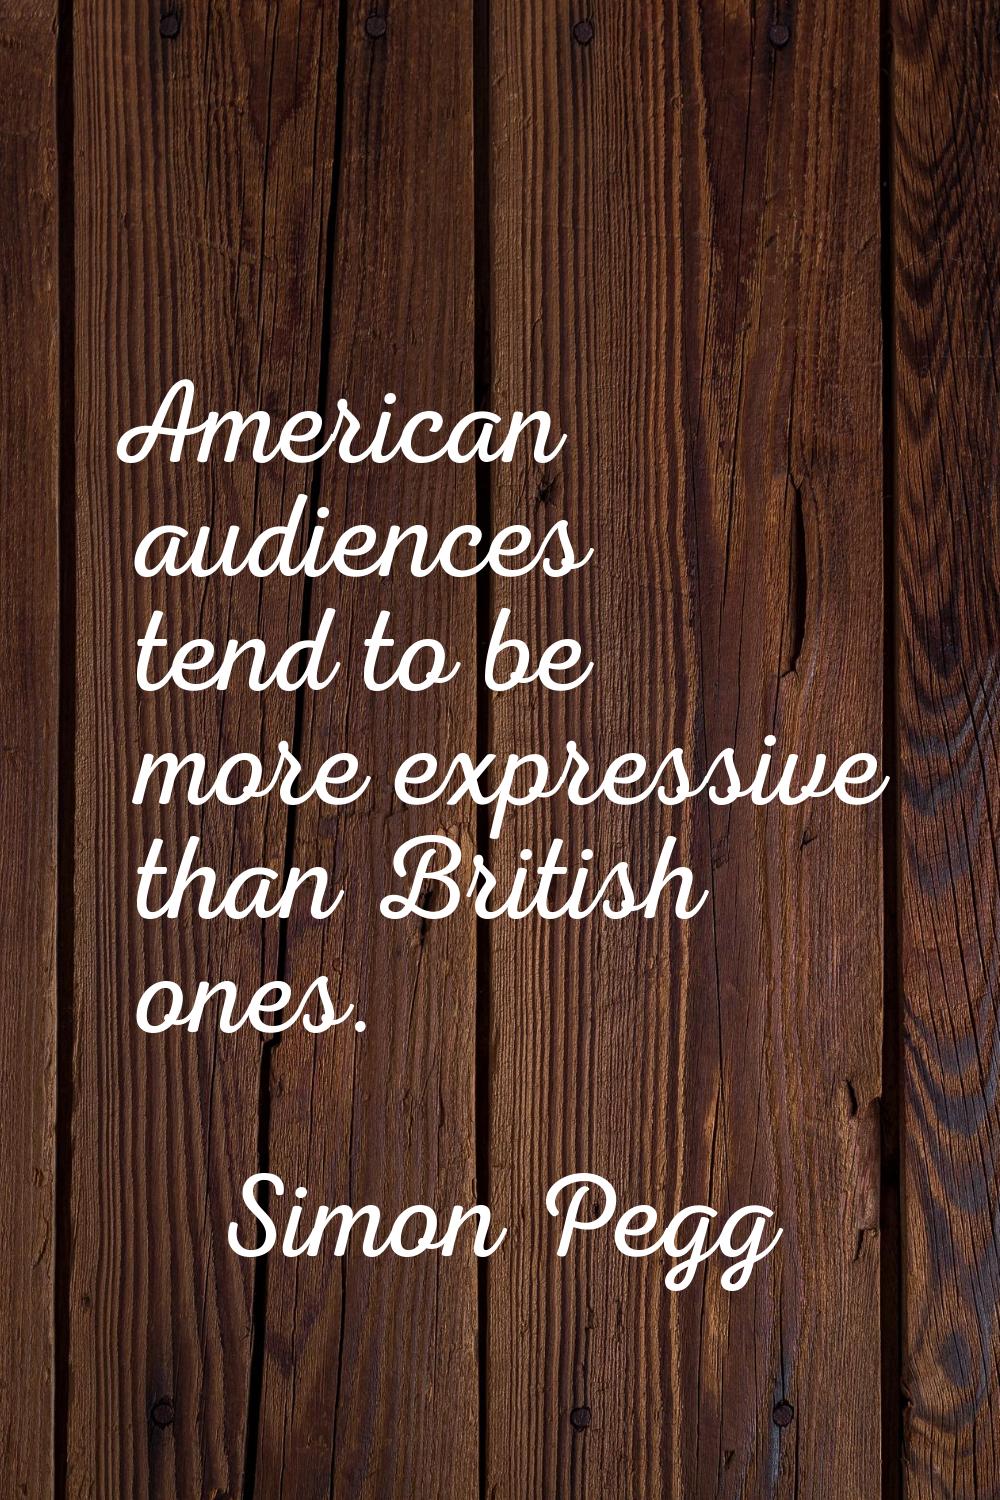 American audiences tend to be more expressive than British ones.